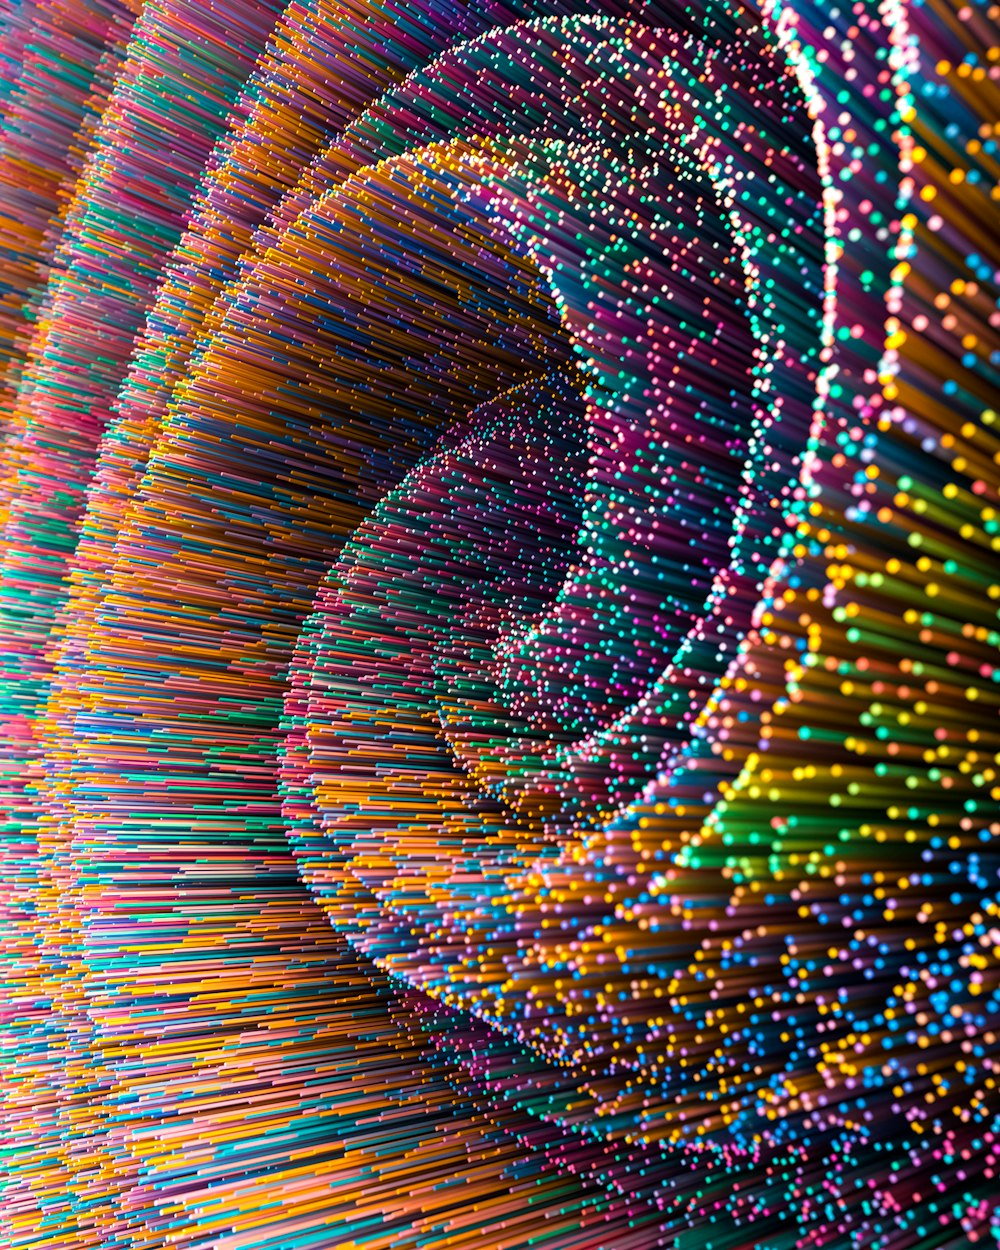 a very colorful art work with lots of beads